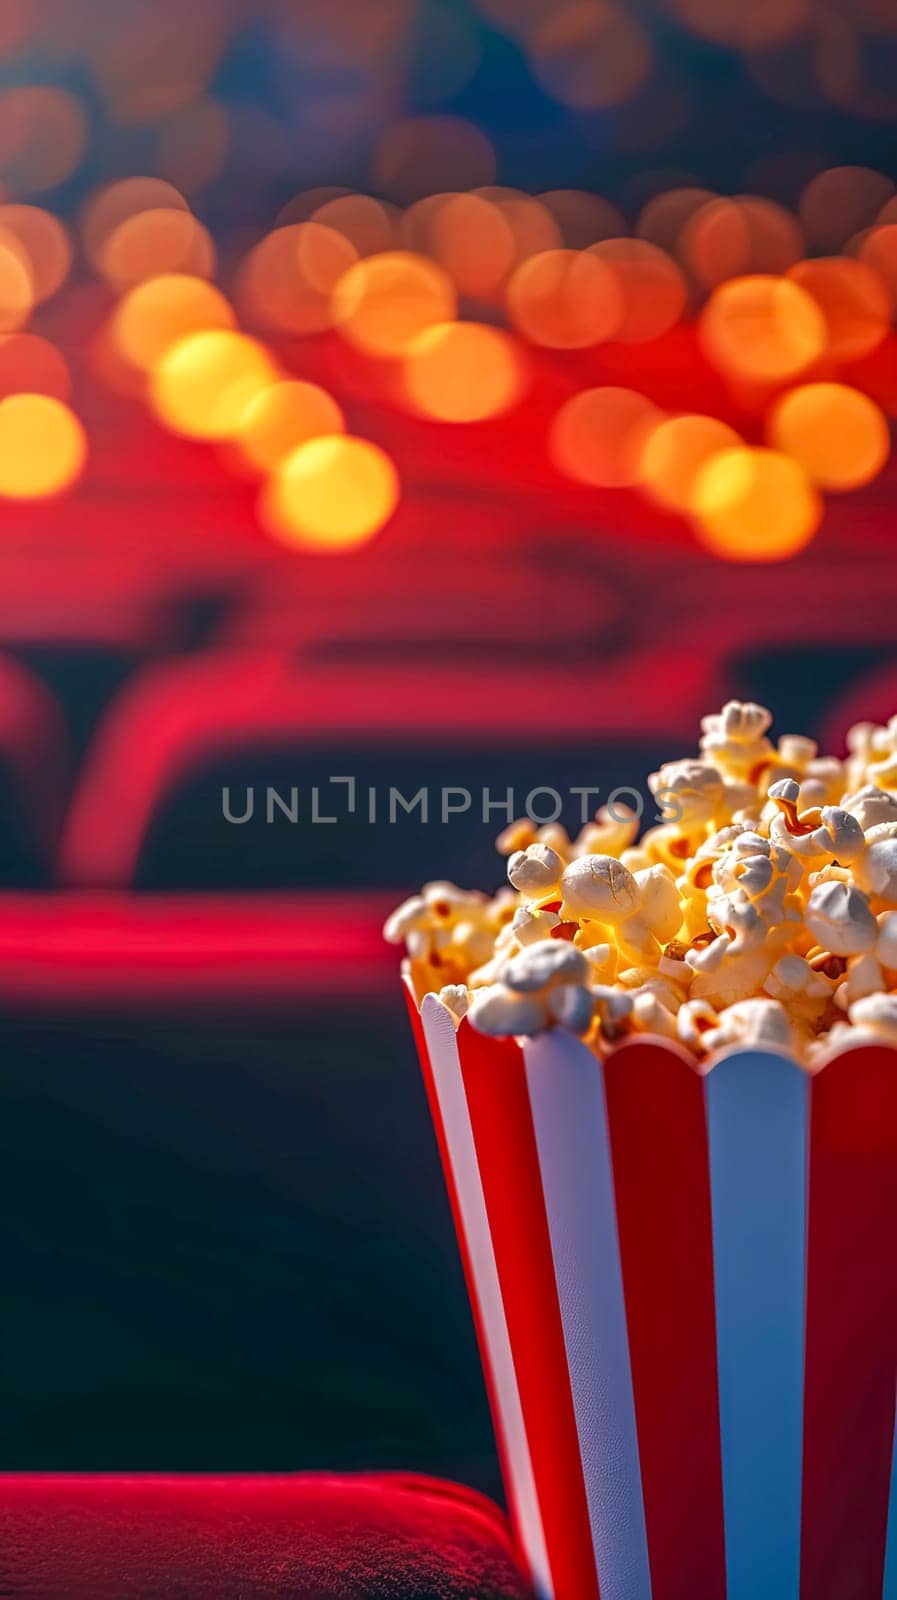 essence of movie time with a close-up of a classic red and white striped popcorn box filled with fluffy kernels, set against the blurred backdrop of red cinema seats and golden bokeh lights by Edophoto